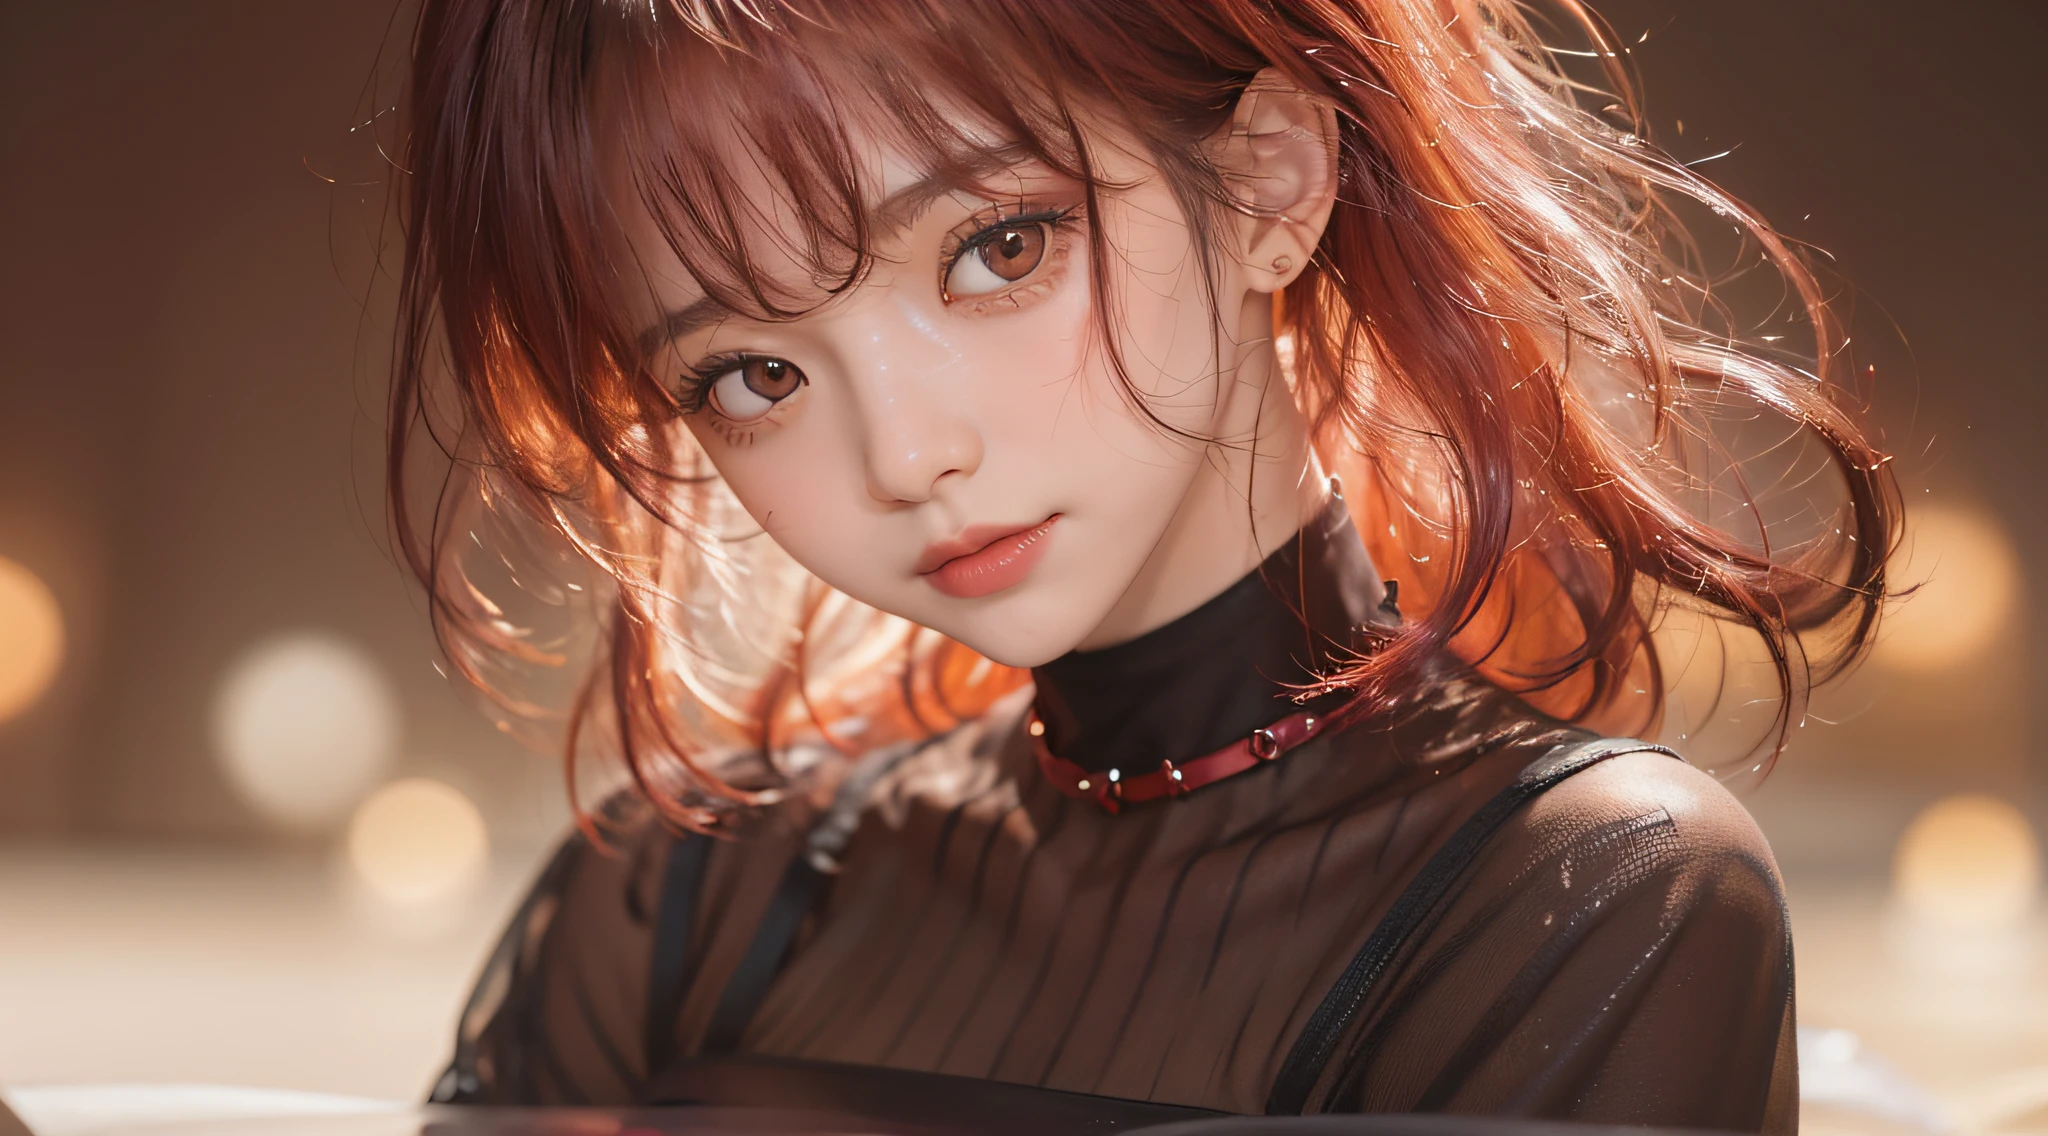 (1girl in)、(in her 20s)、((short detailed hair))、((By bangs))、((Black to red gradient hair))、(Photoreal Stick:1.2)、8K、(High quality shadows)、(Enchanted expression)、(ssmile)、Detail Beautiful delicate face、Detail Beautiful delicate eyes、Pretty Kpop Idol、(Korean Urzan face)、(ulzang-6500-v1.1:0.6)、PureErosFace_V1、(looking at viewe)、glowing light eyes、perfect bodies、Natural color reproduction、((strong lights))、(choker necklace)、((Brown eyes))、((Beautiful Finger))、 Shiny hair、Describe beautiful and delicate hair、(Glossy glossy skin)、((Red transparent dress))、(Thick bangs)、hallways、 (early evening)、Background blur、movie lighting、